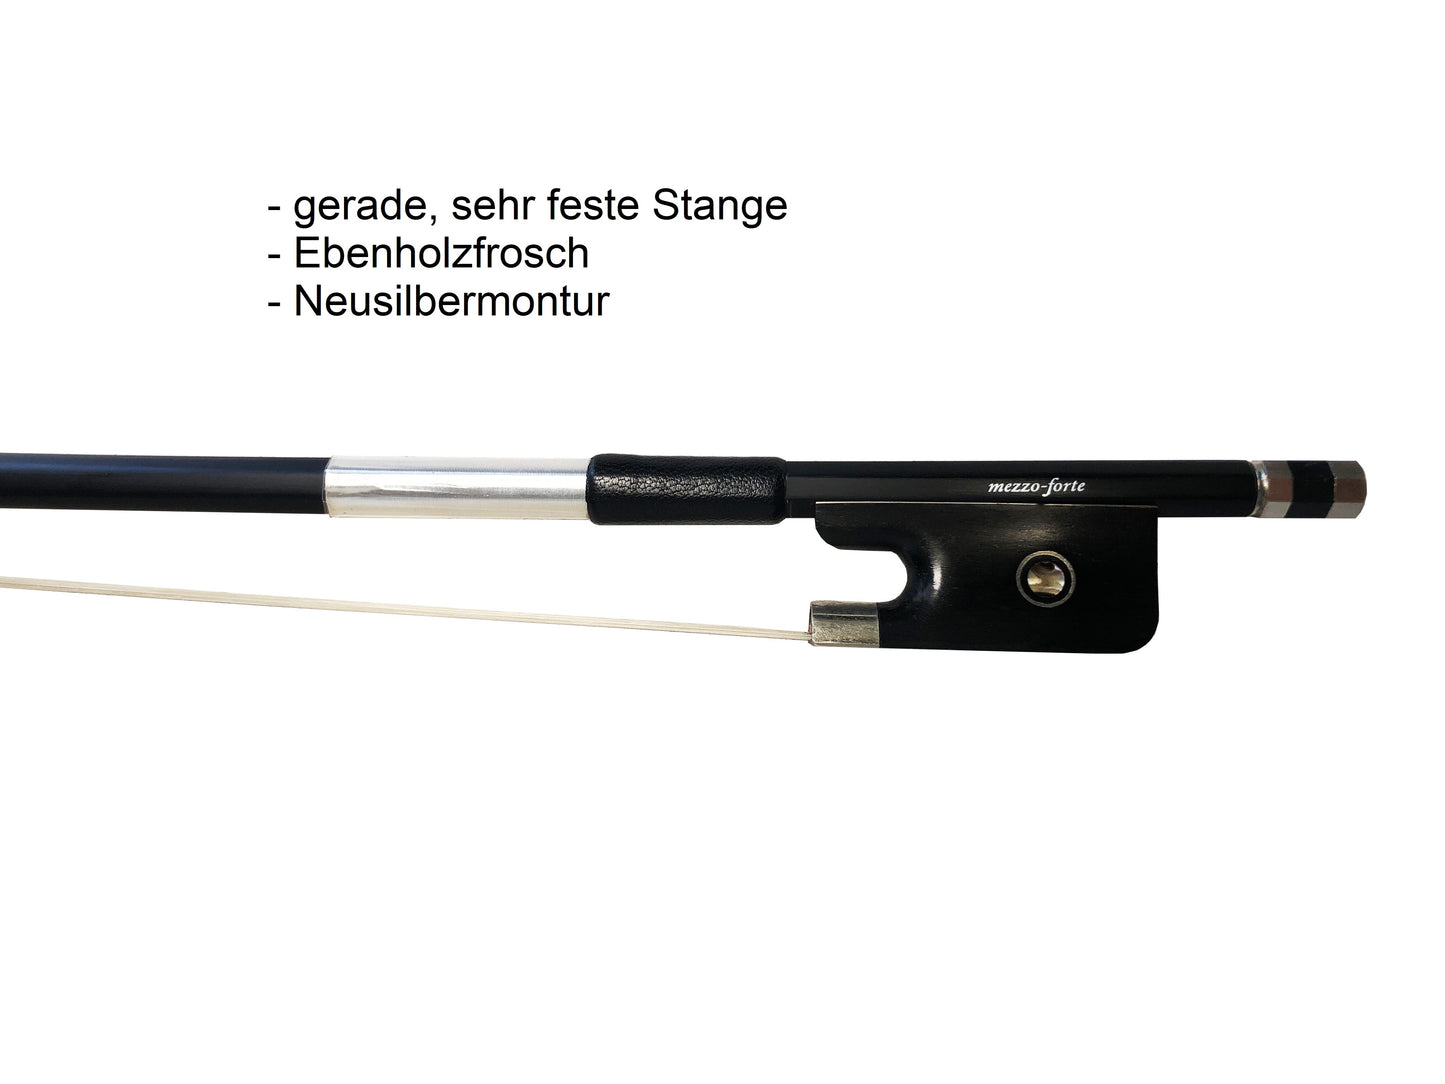 Viola bow viola bow carbon, playful and robust